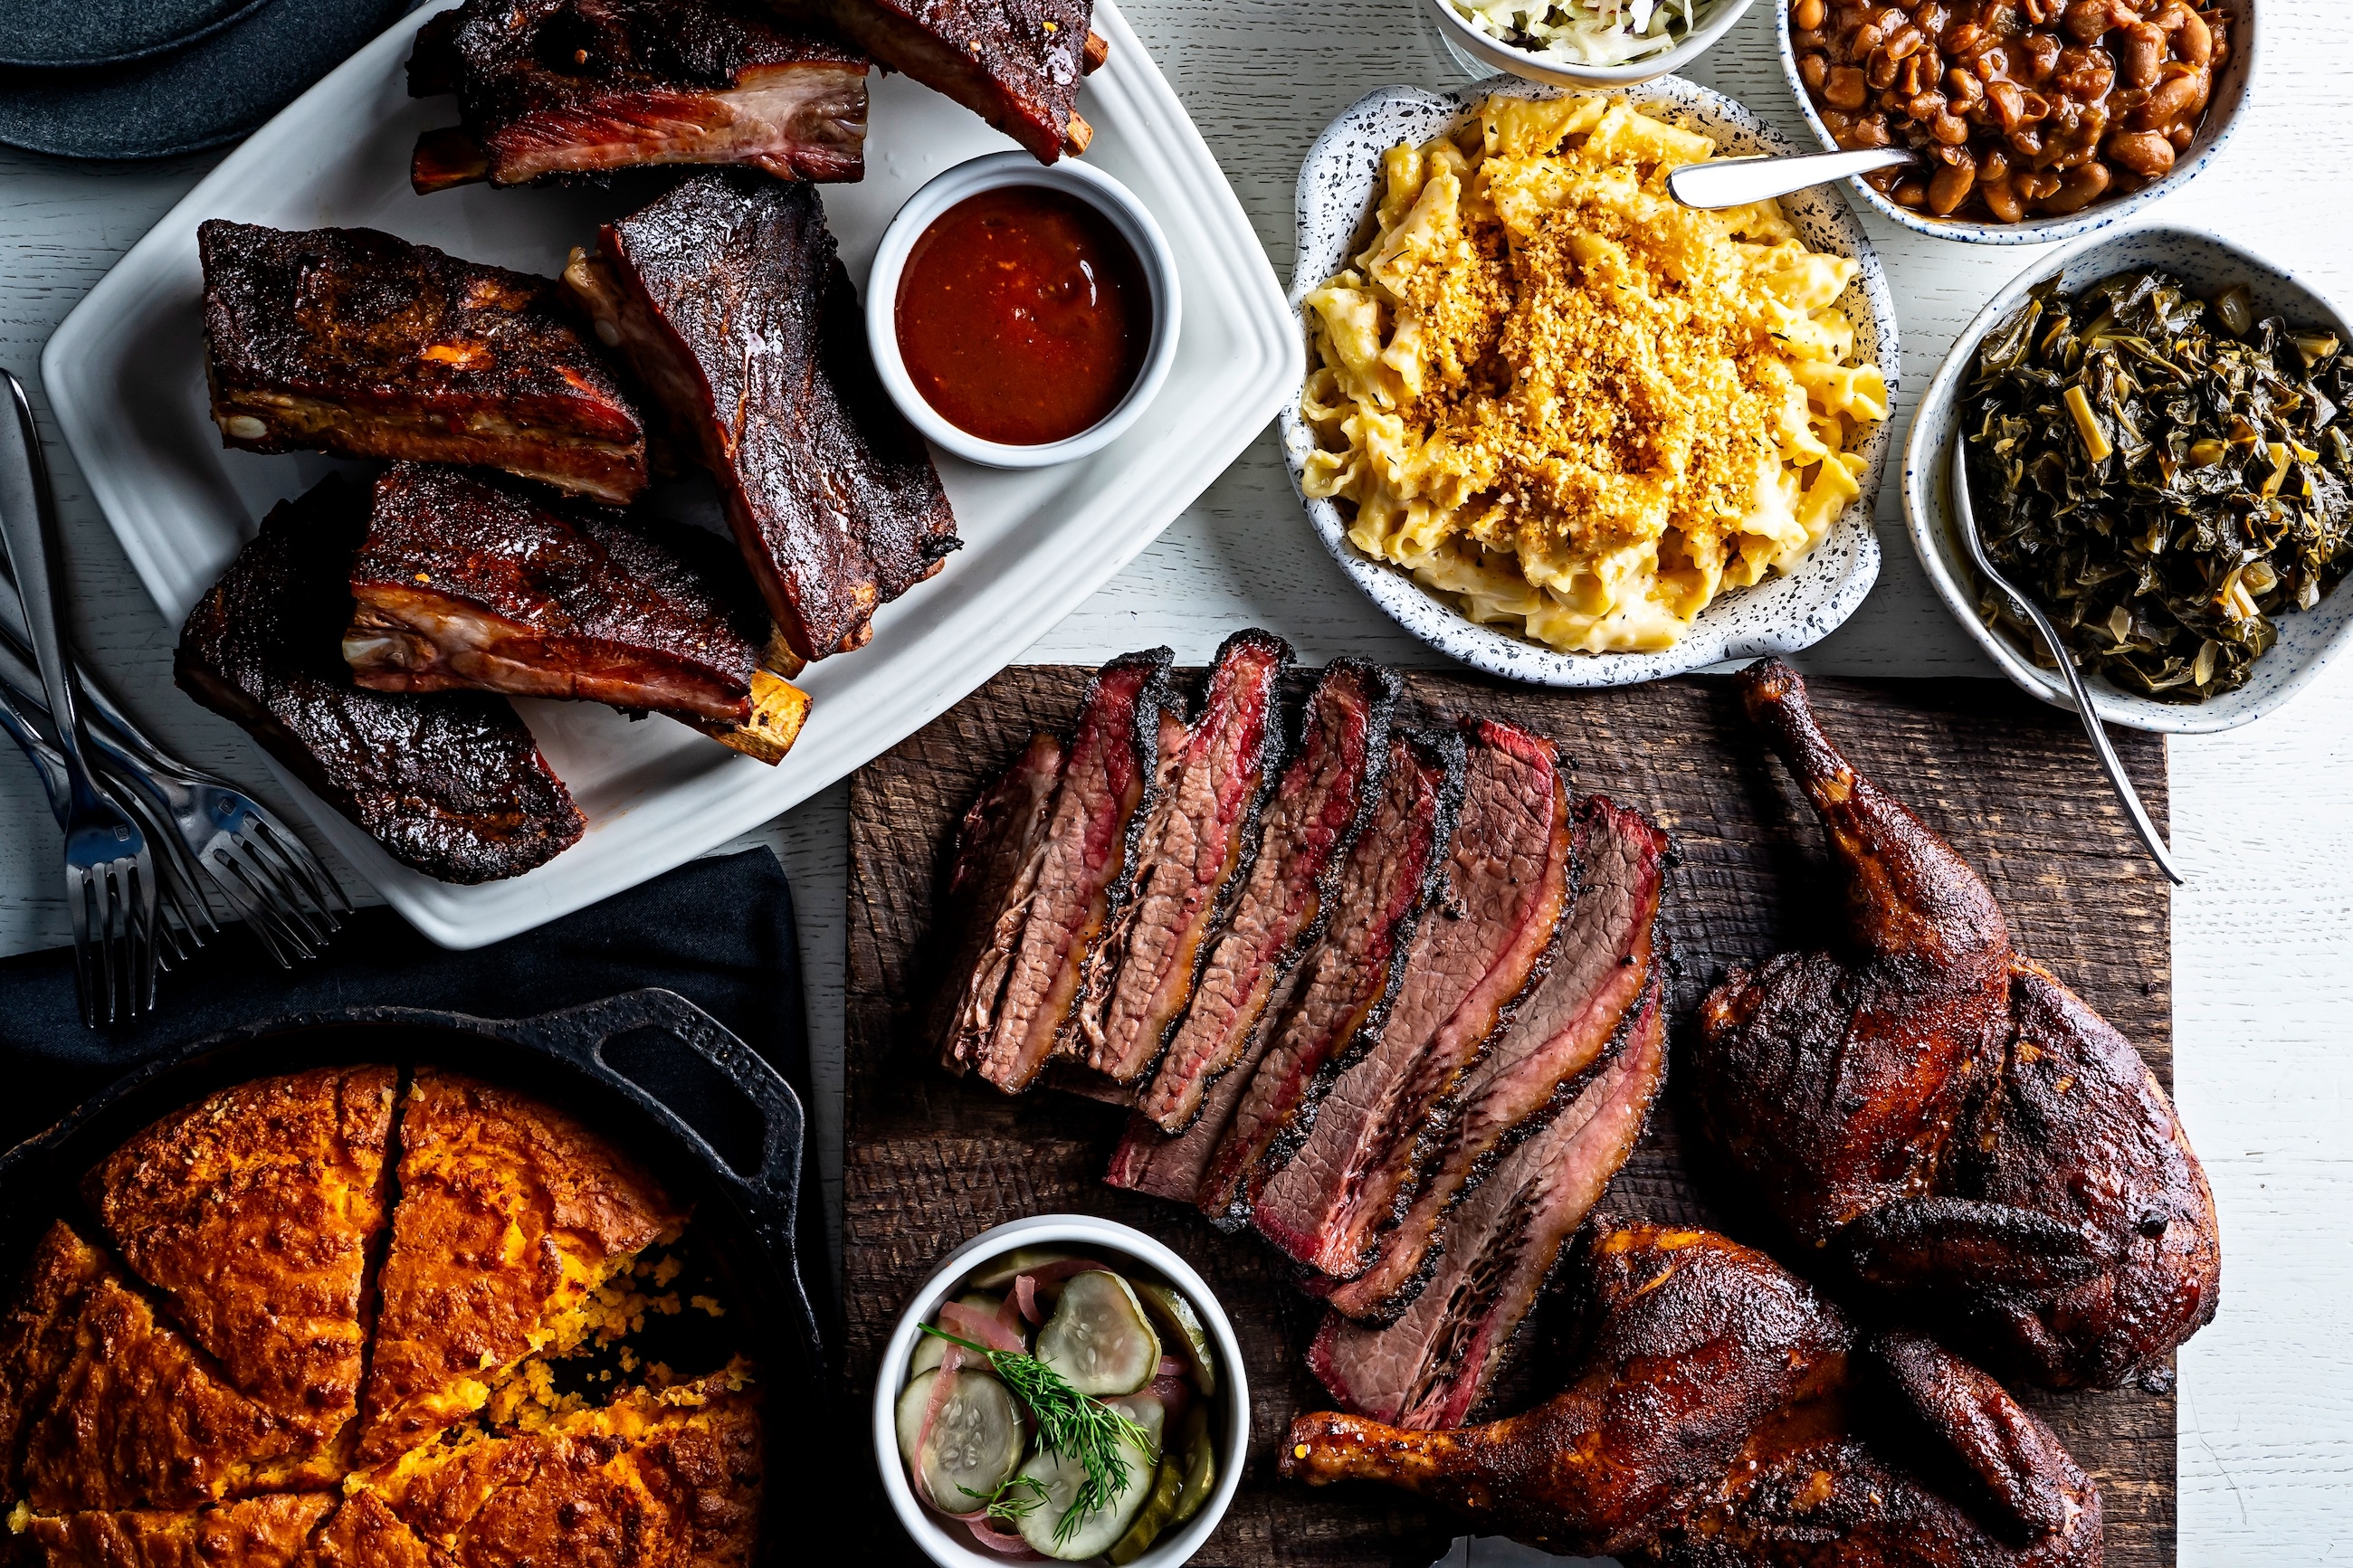 A platter of cornbread, brisket, Mac and cheese and other Super Bowl foods.